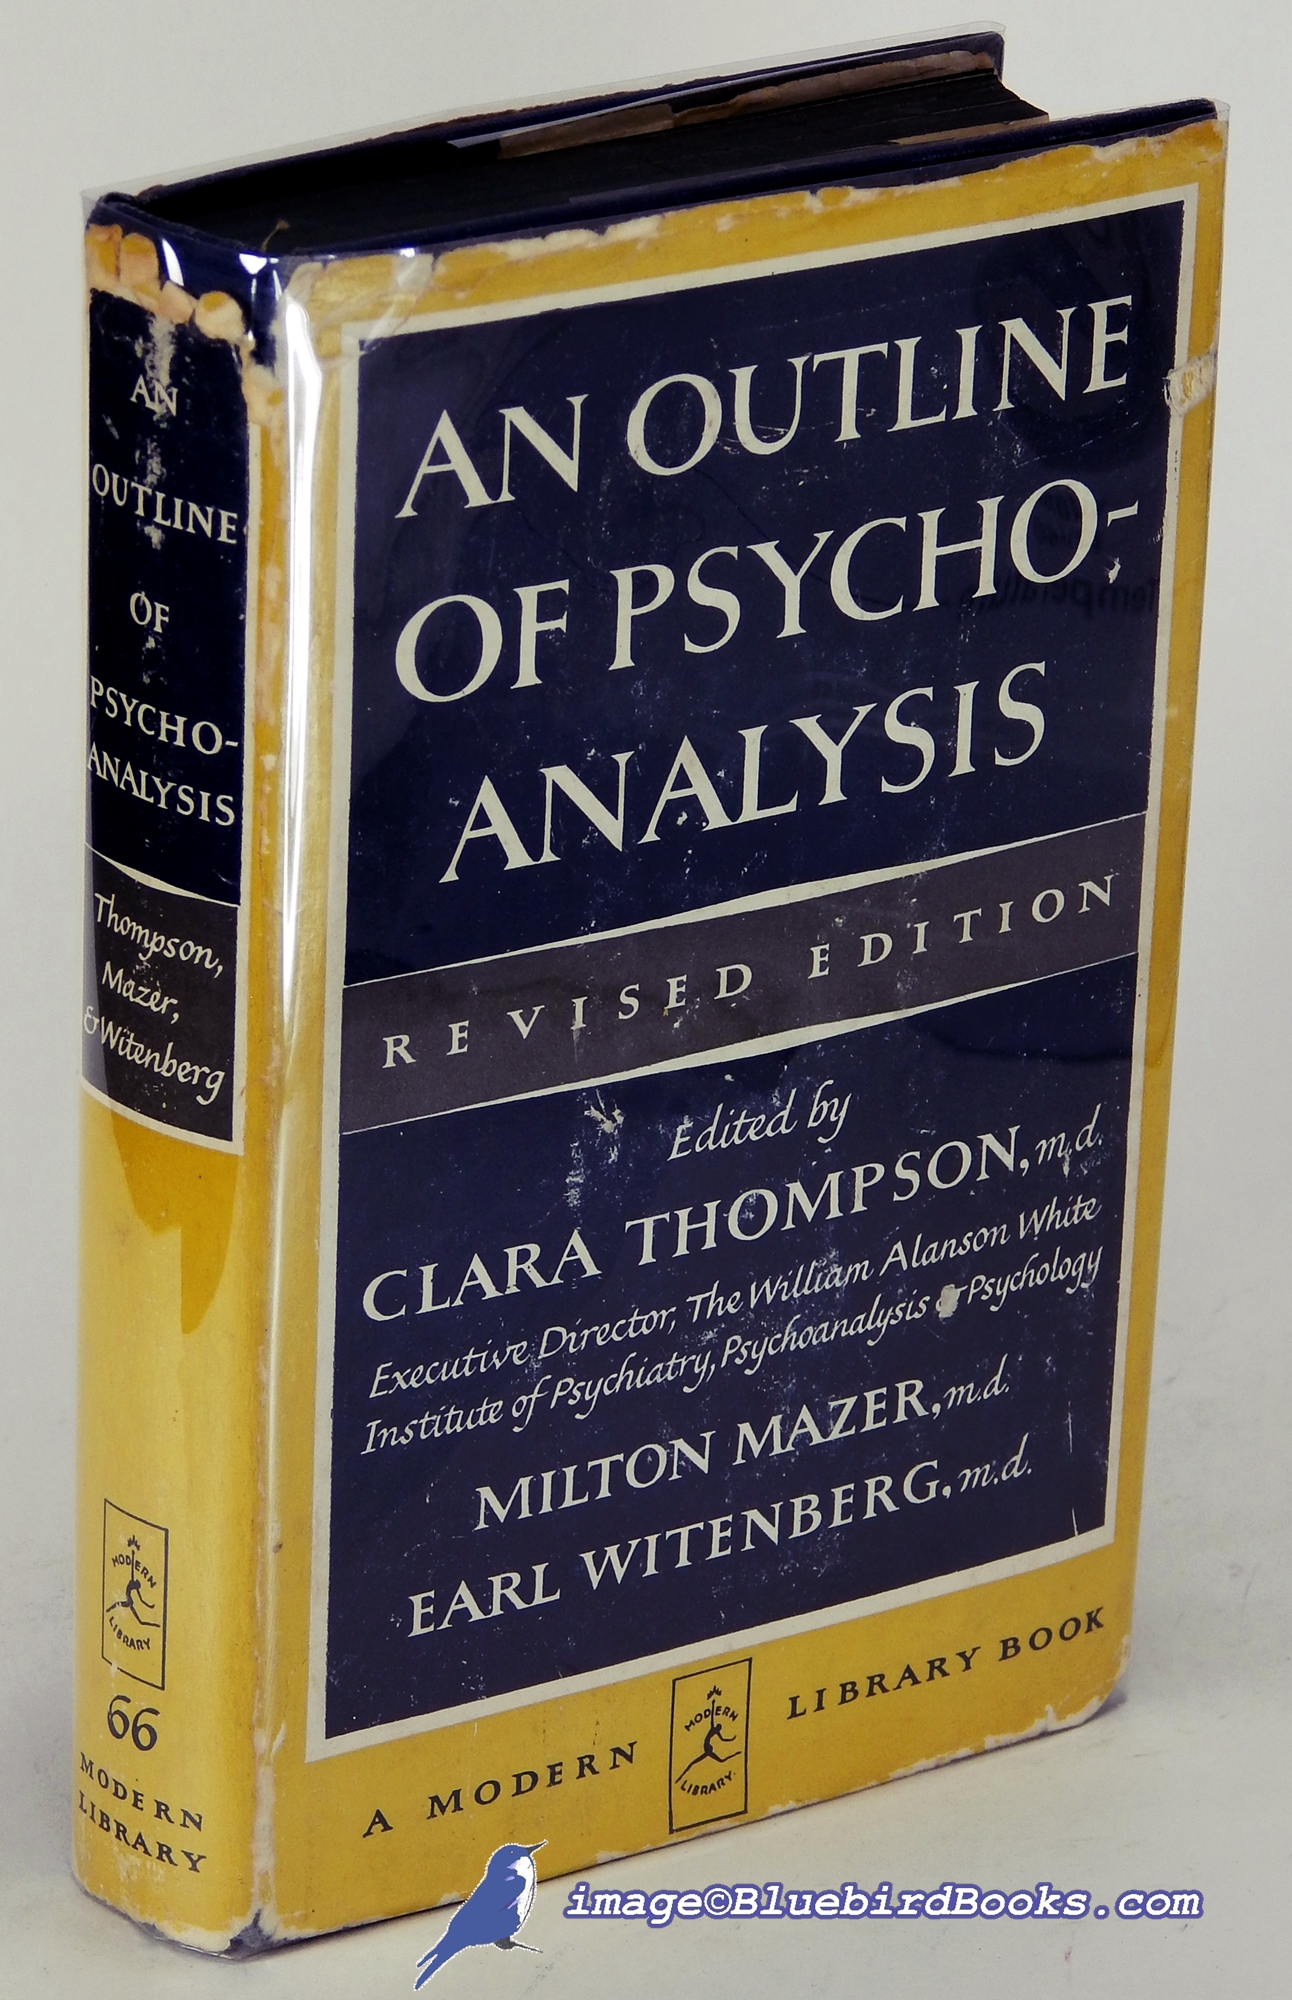 THOMPSON, CLARA; MAZER, MILTON; WITENBERG, EARL (EDITORS) - An Outline of Psychoanalysis, Revised Edition (Modern Library #66. 2)